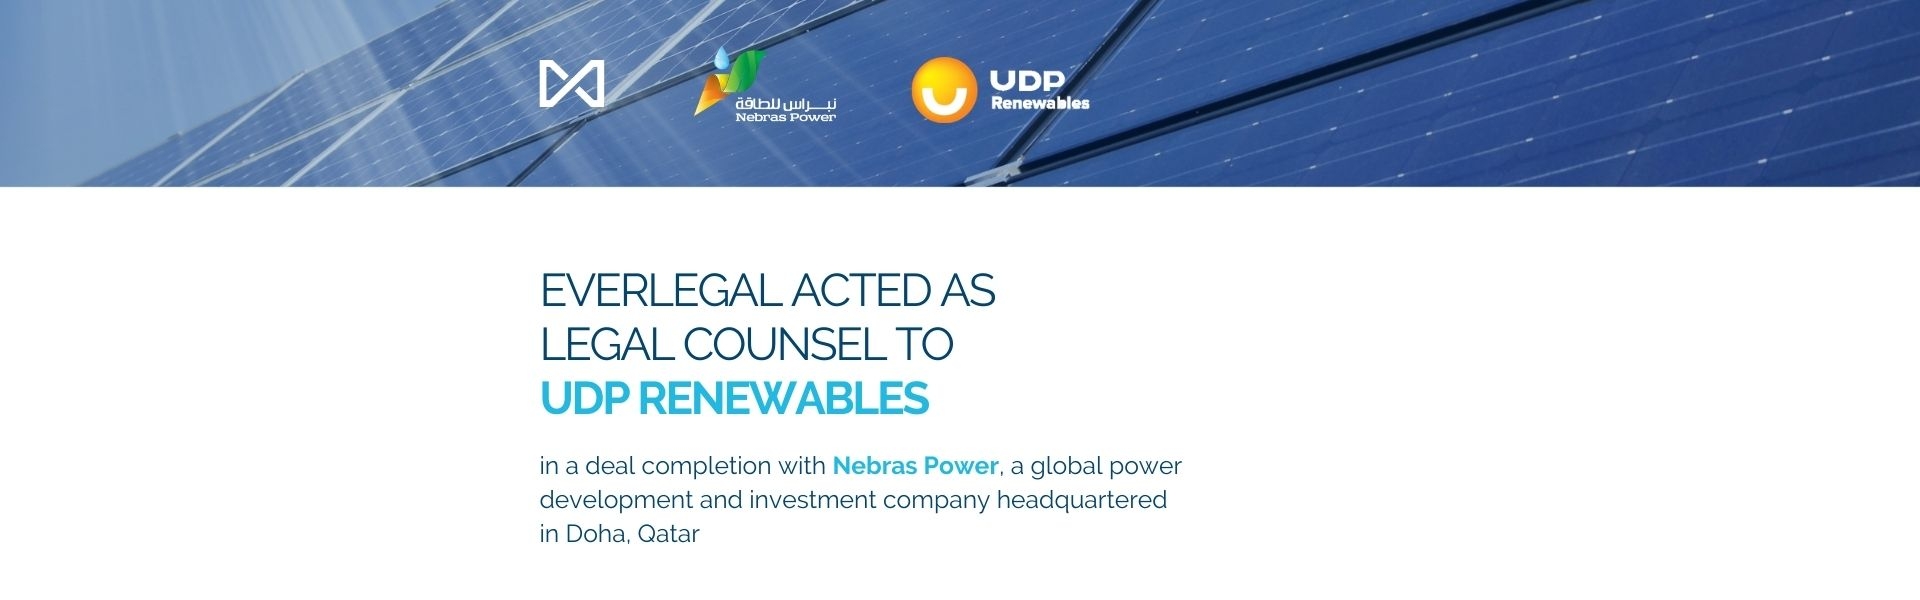 EVERLEGAL acted as legal counsel to UDP Renewables in a deal completion with Nebras Power